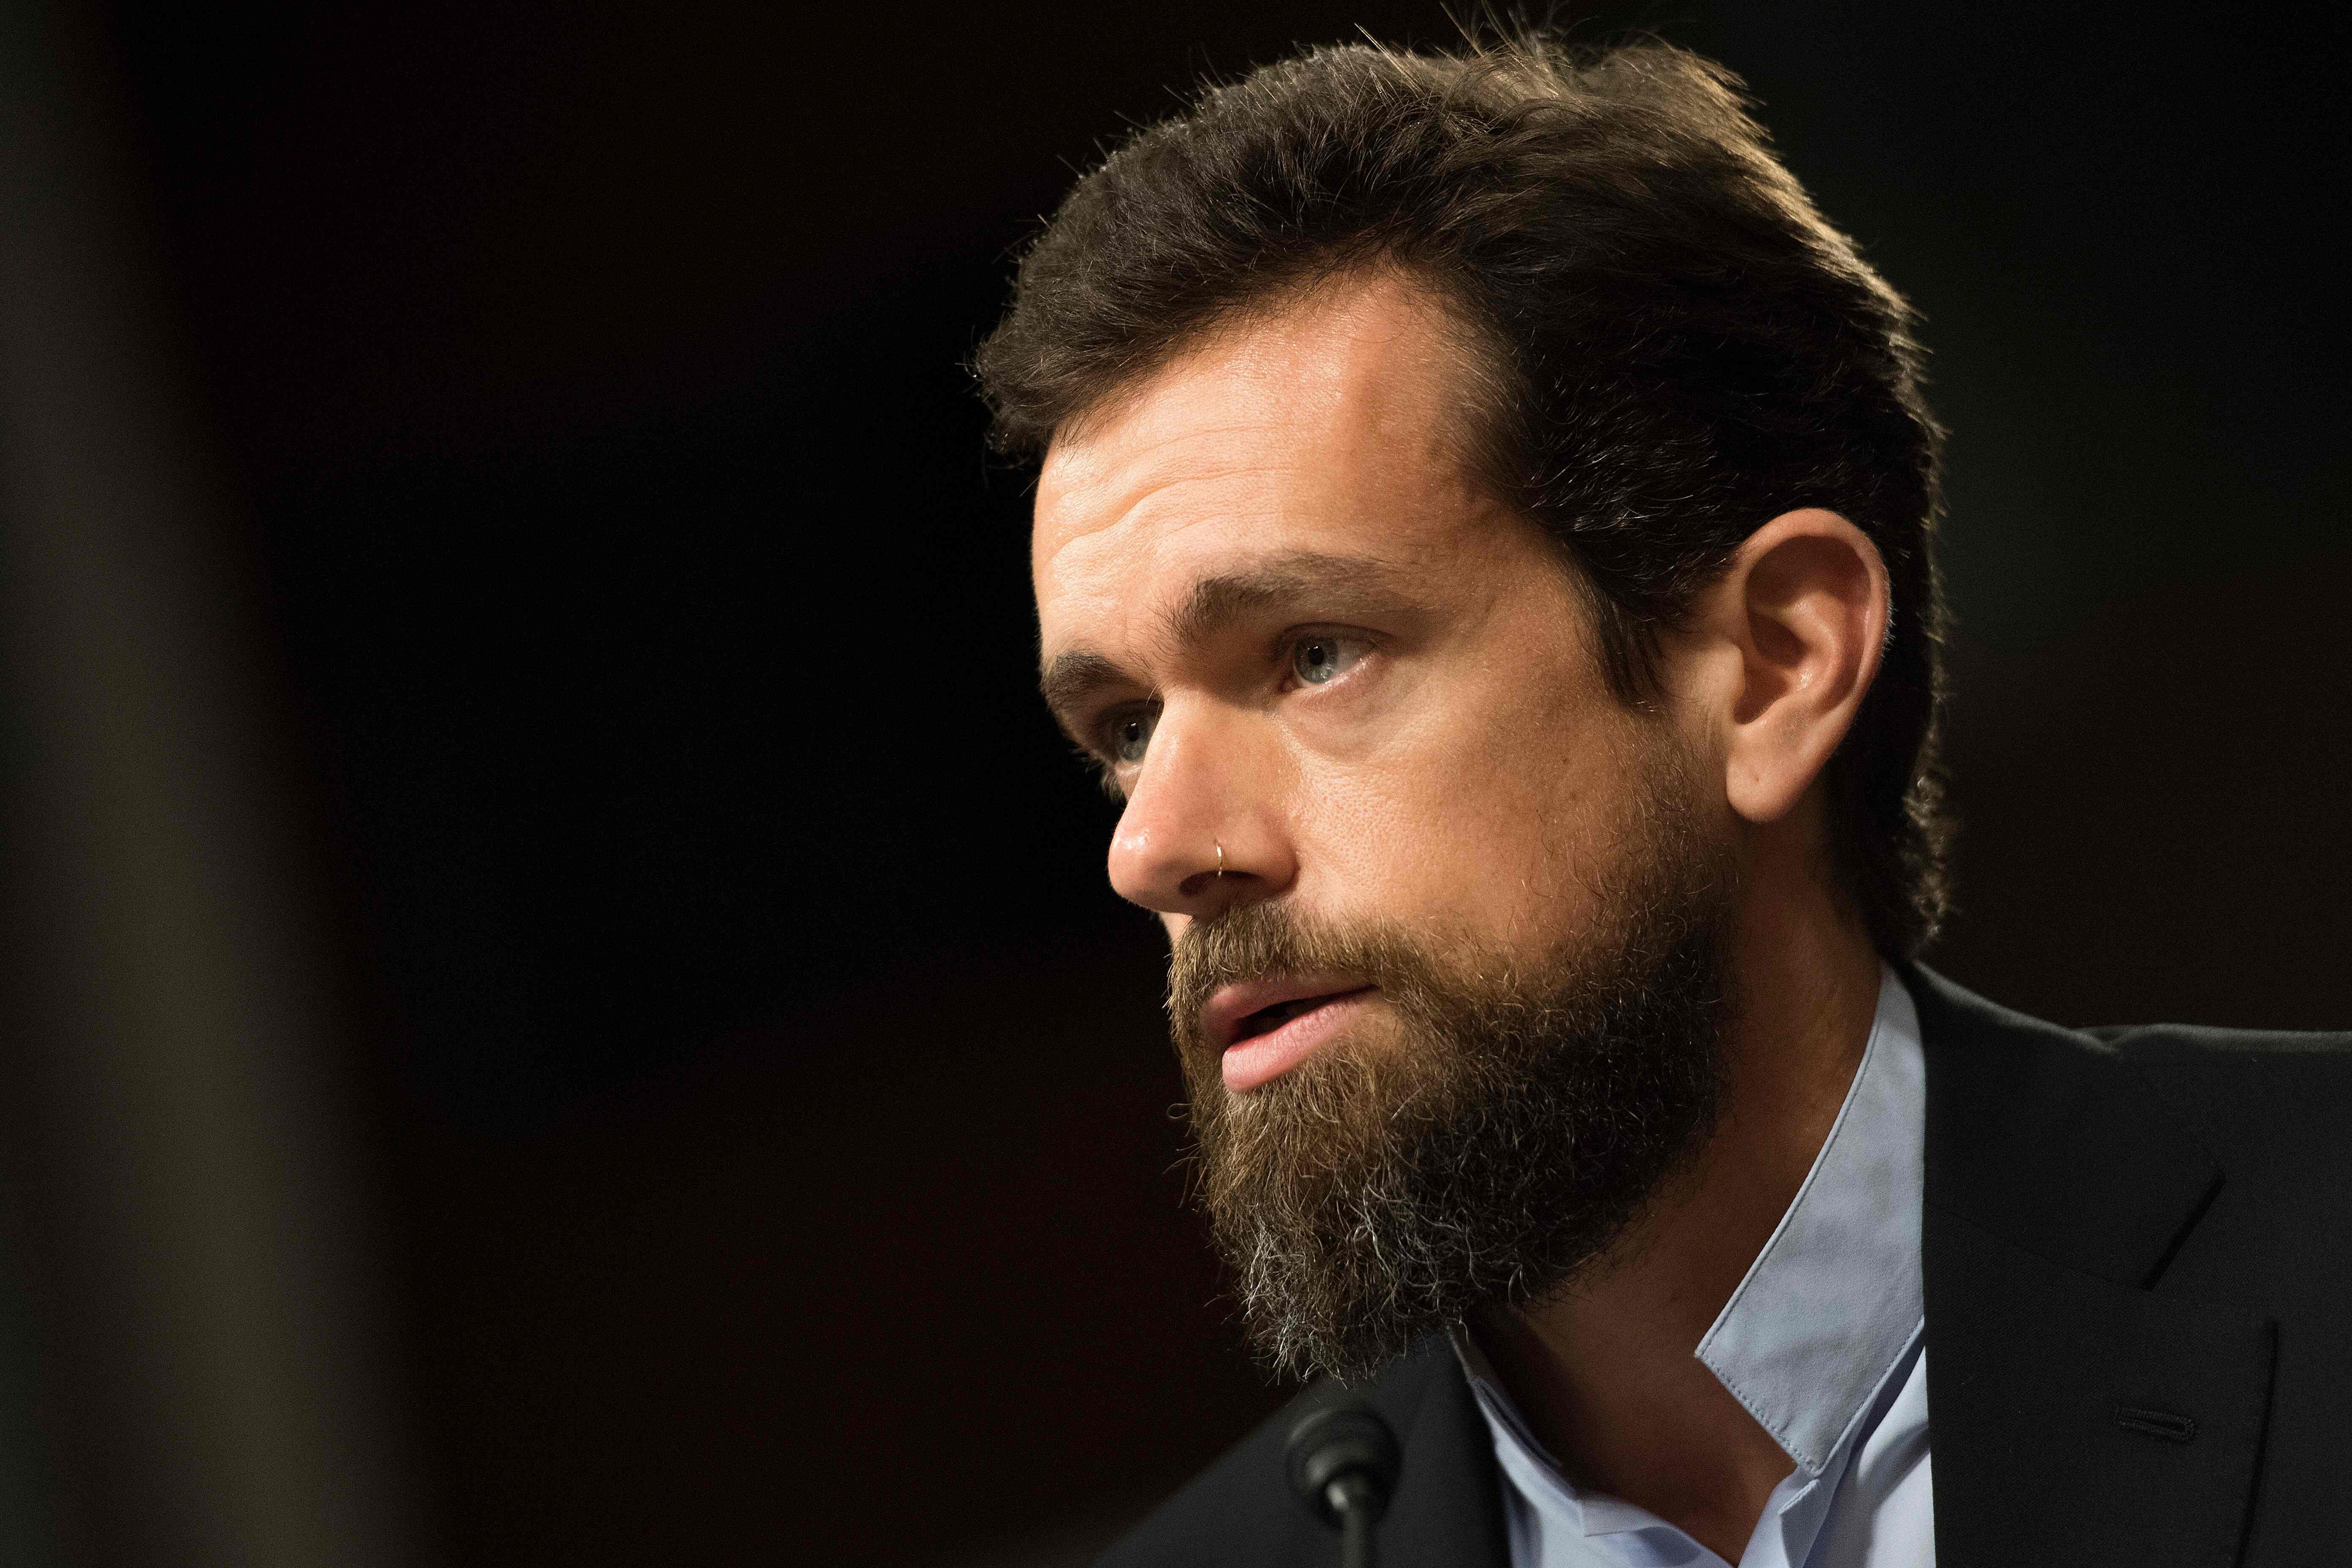 Twitter CEO Jack Dorsey said that while the ban was called for now, taking actions to fragment public conversation could be ‘destructive to the noble purpose and ideals of the open internet’ over the long term. Photo: AFP